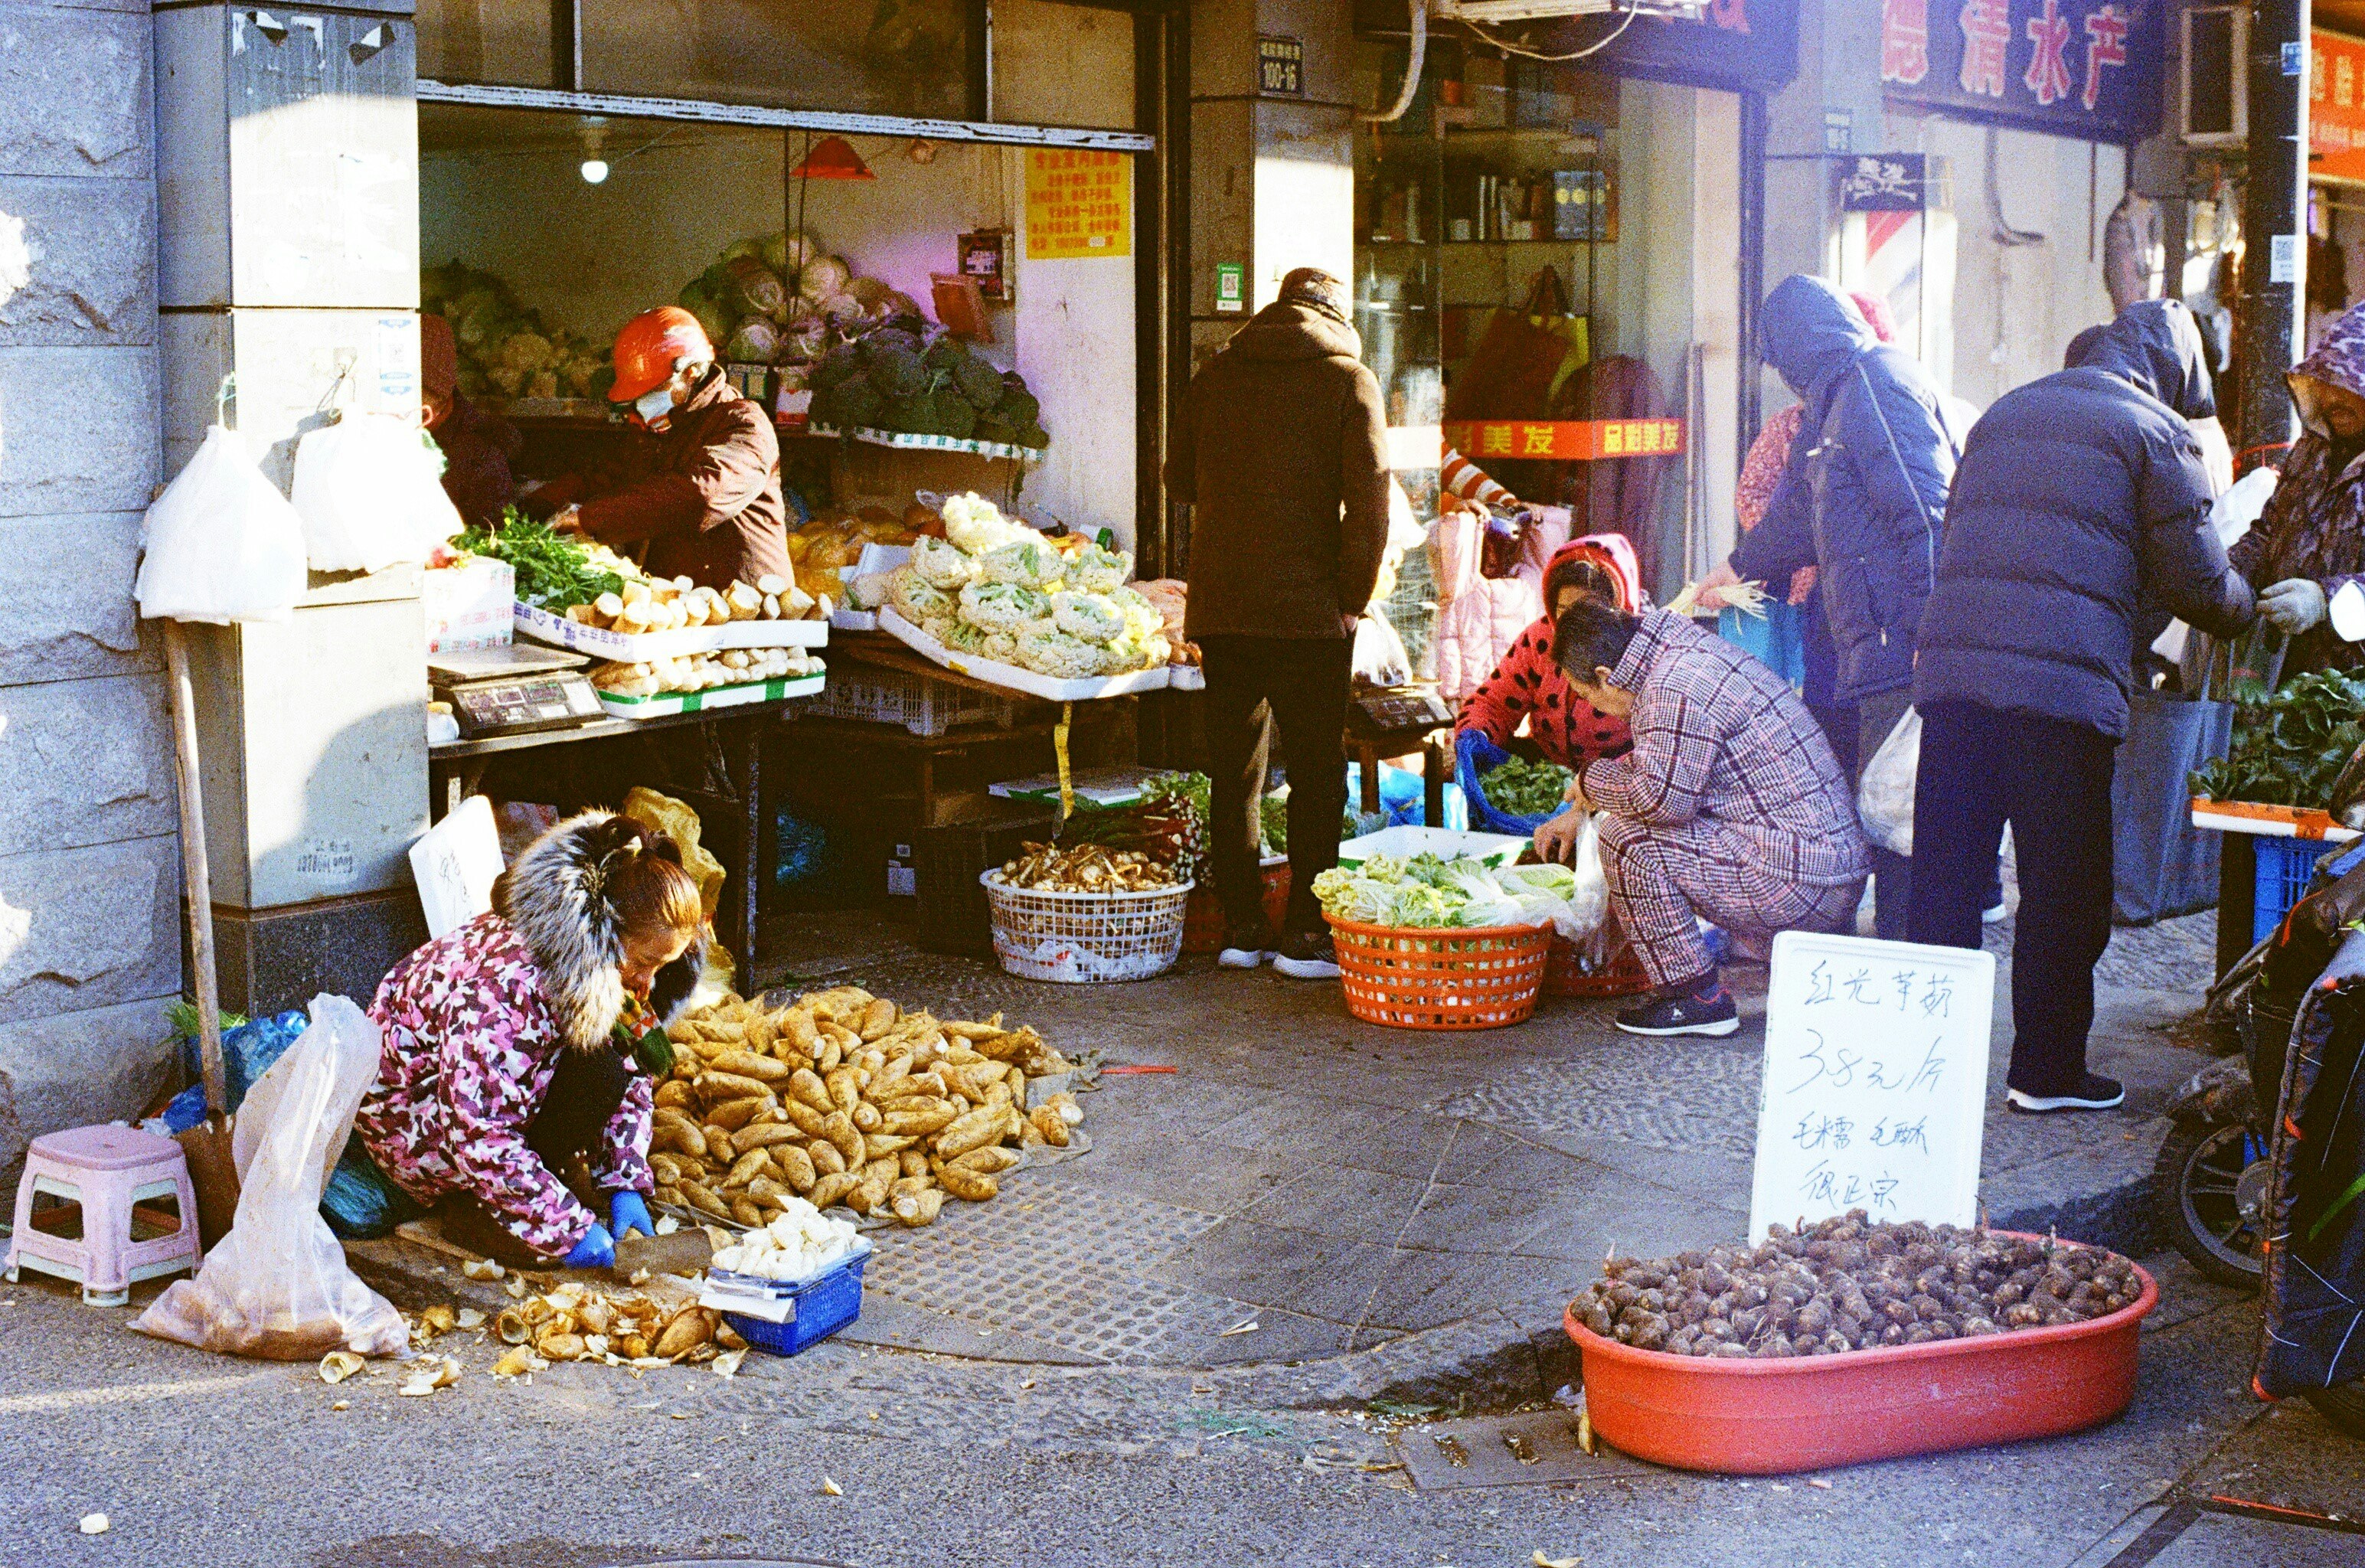 A food market in the streets of Hangzhou. This photo was taken early in the morning, people are getting ready for the day.